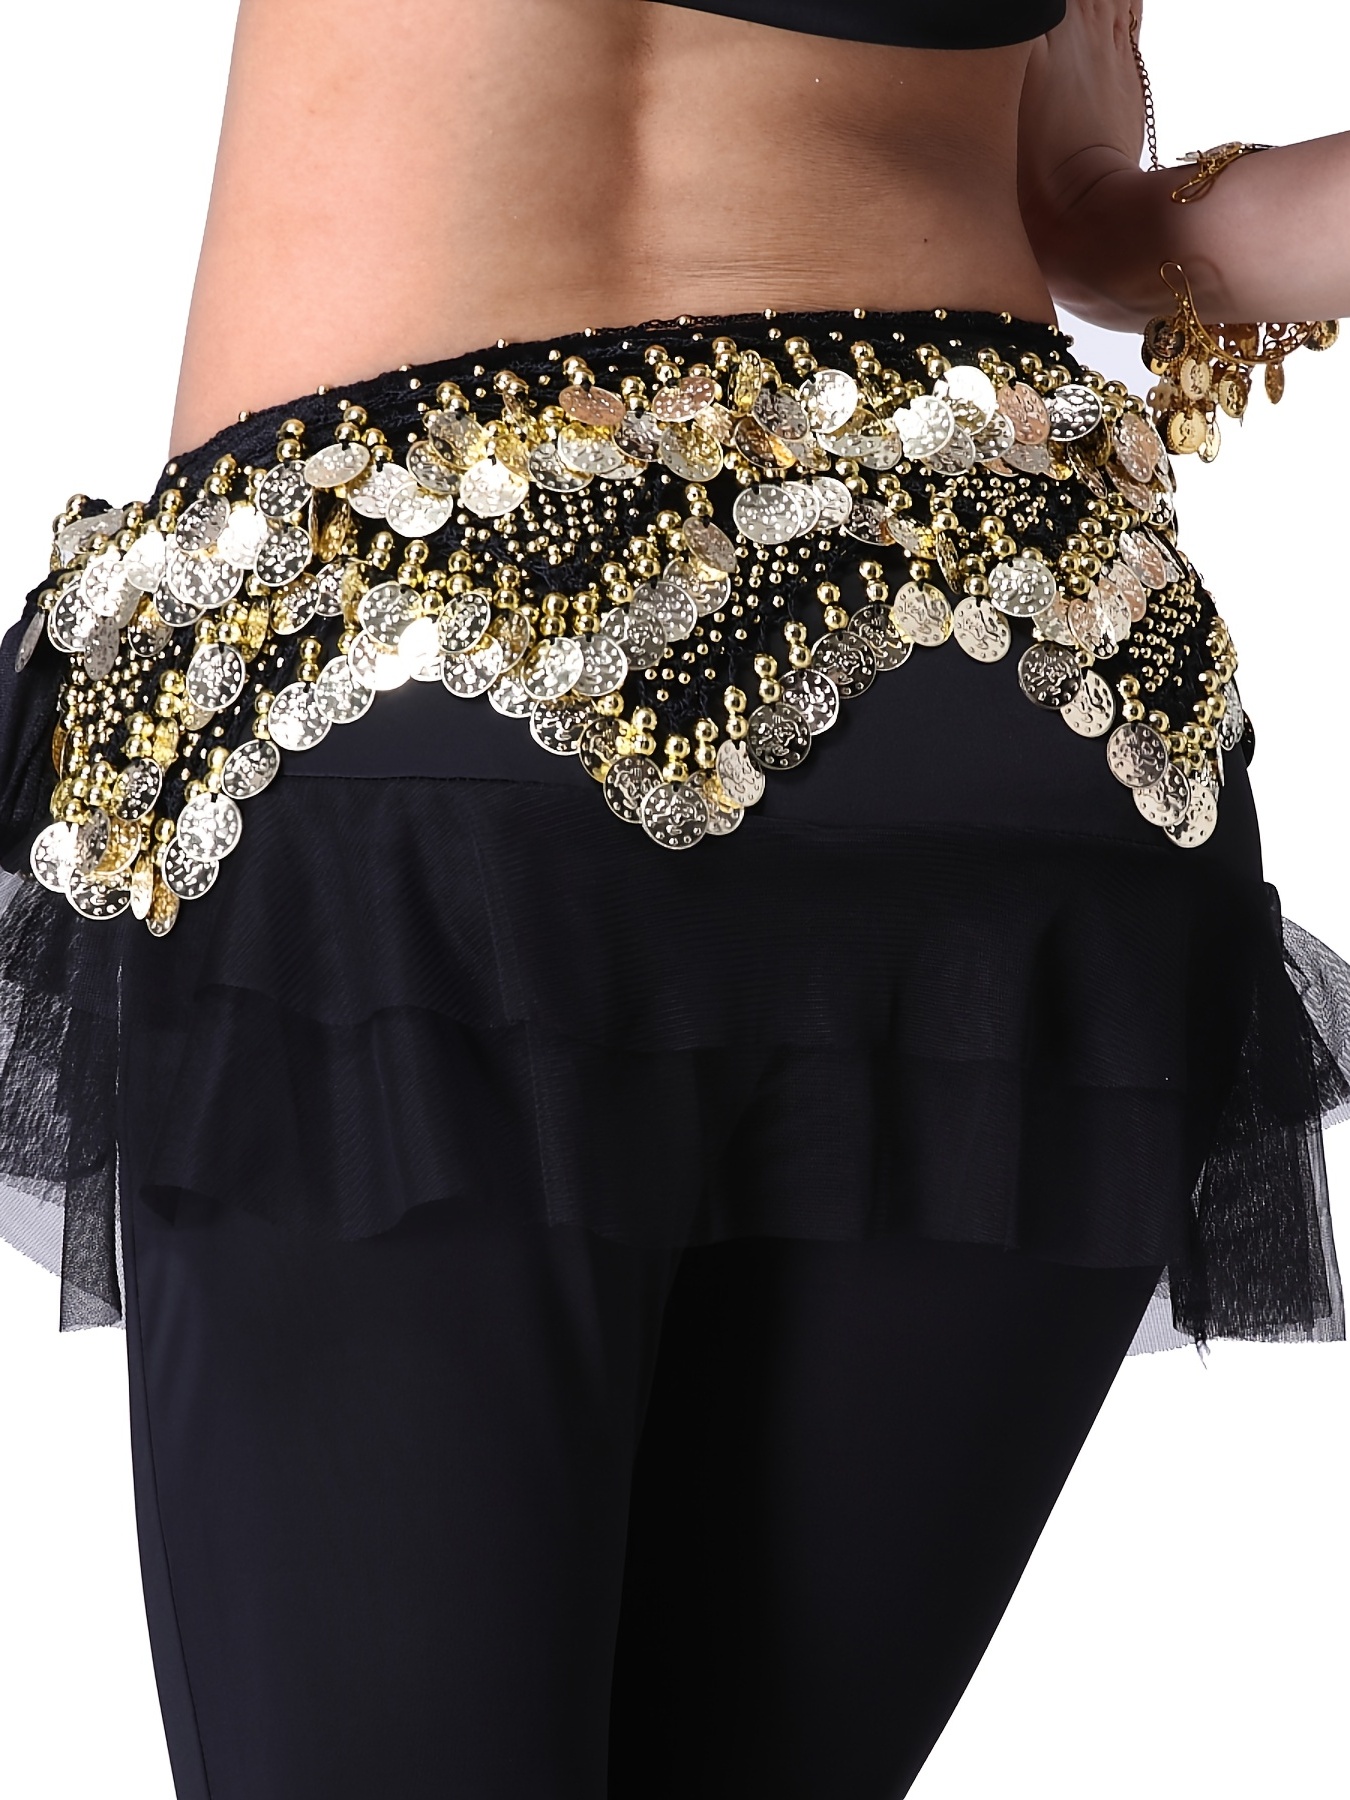 Professional Belly Dance Costumes India Dance Hip Scarf Skirt , Tassel  Scarf Sequin Wrap Nightclub Party Music Festival Revelry Costume for Women  